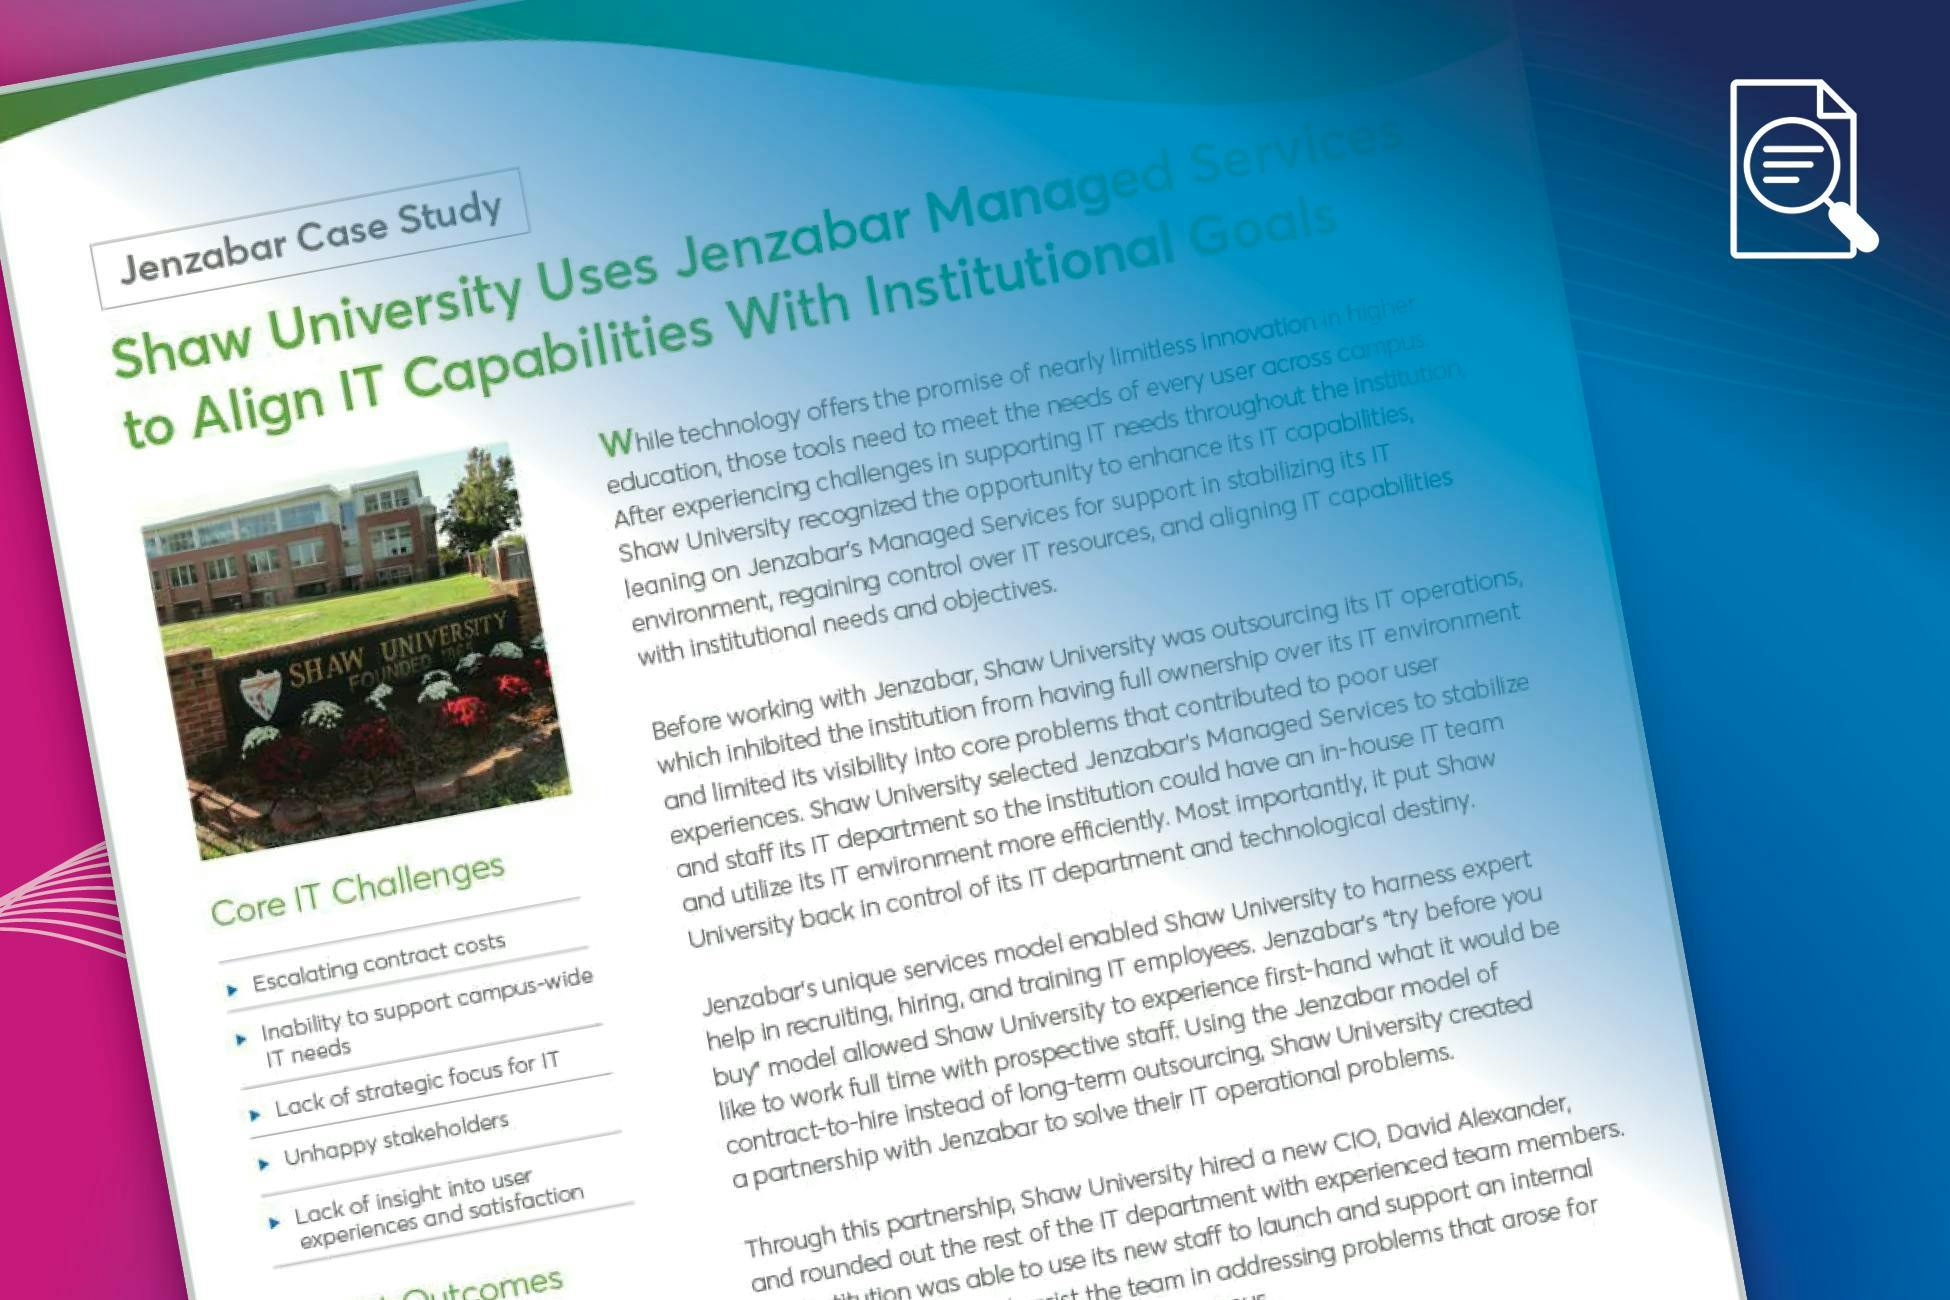 Case Study: Shaw University Uses Jenzabar Managed Services to Align IT Capabilities With Institutional Goals